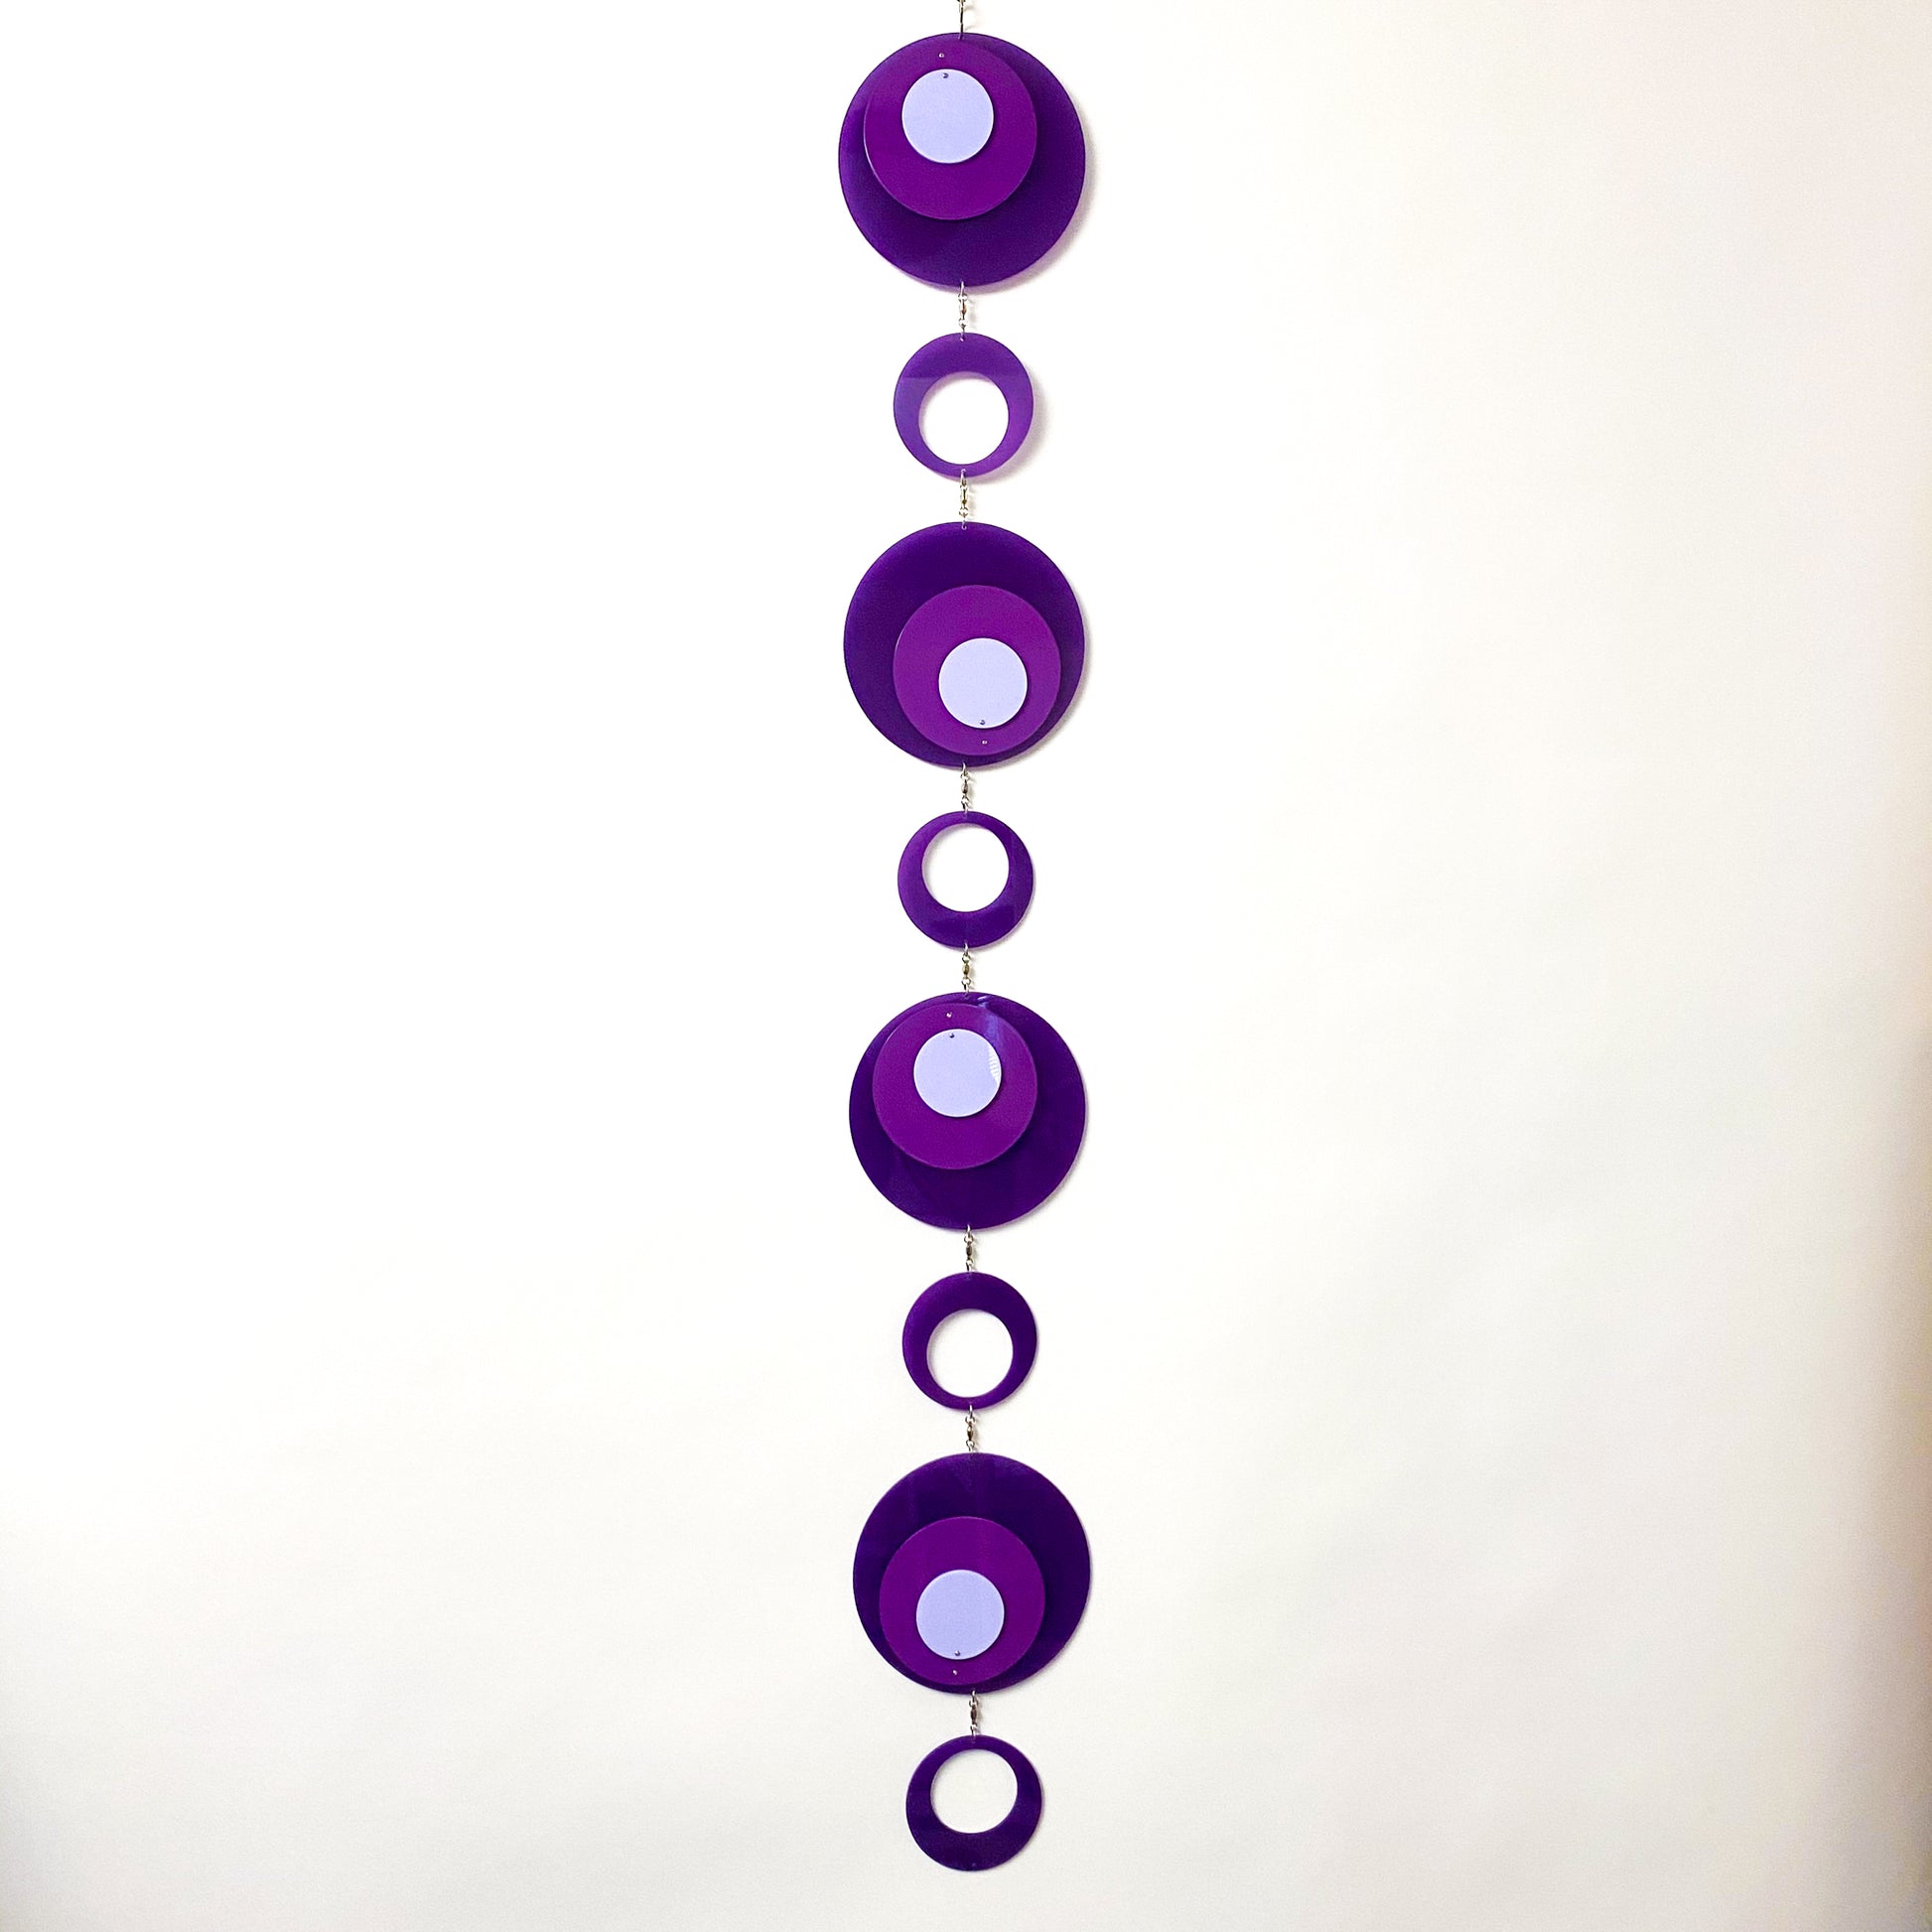 Large Retro 1970s vertical kinetic art mobile in purple circle DOTS ready to ship today by AtomicMobiles.com